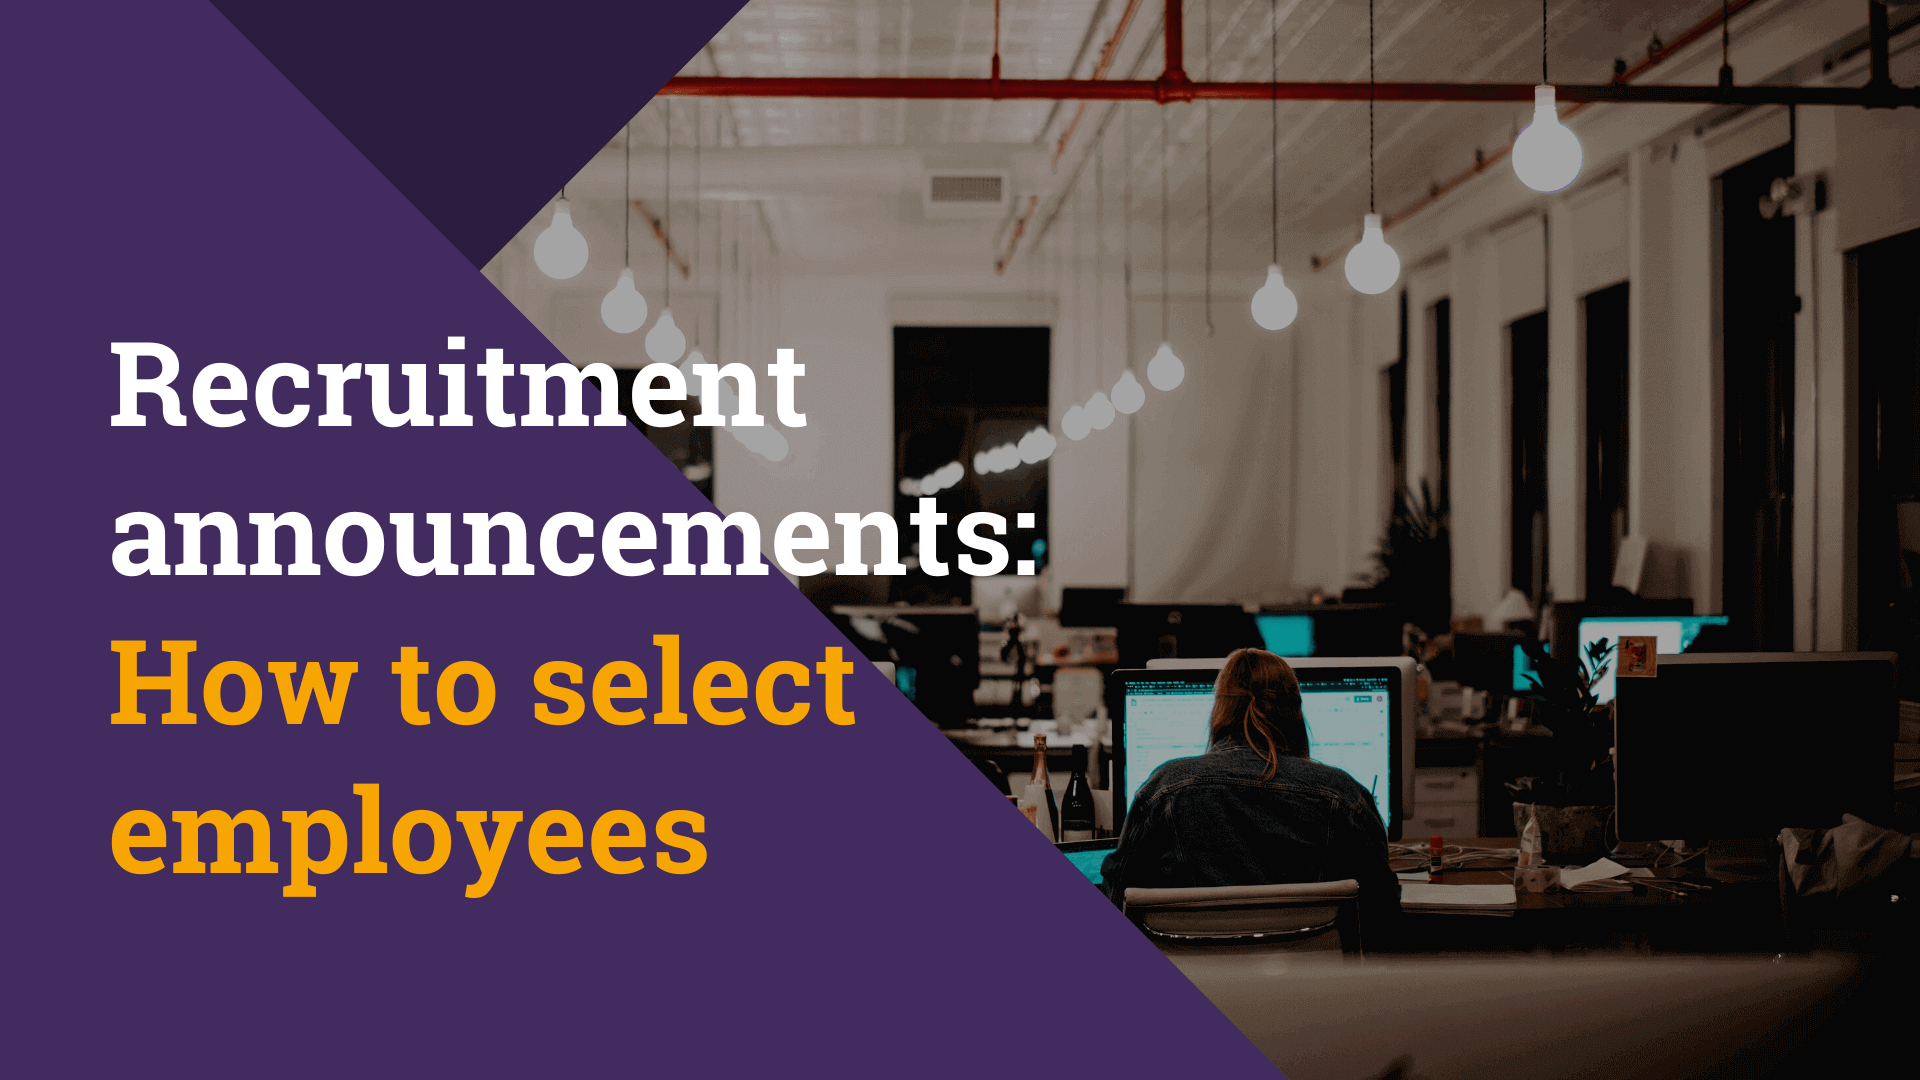 Recruitment announcements: how to select employees